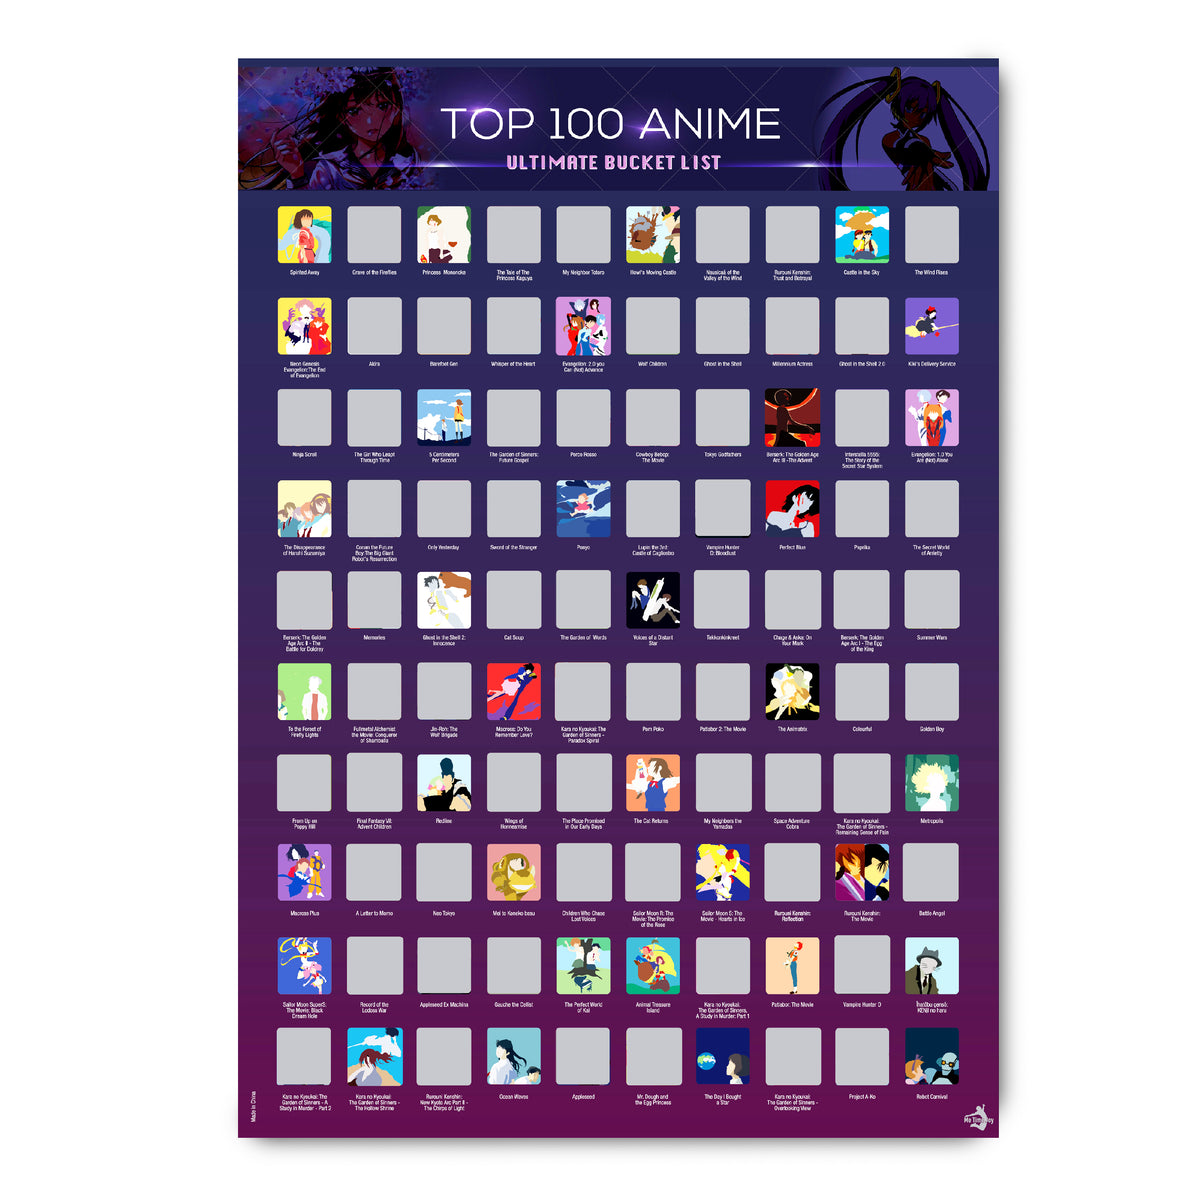 Fuiyoh Anime Poster - Top 100 Anime Scratch Off Poster